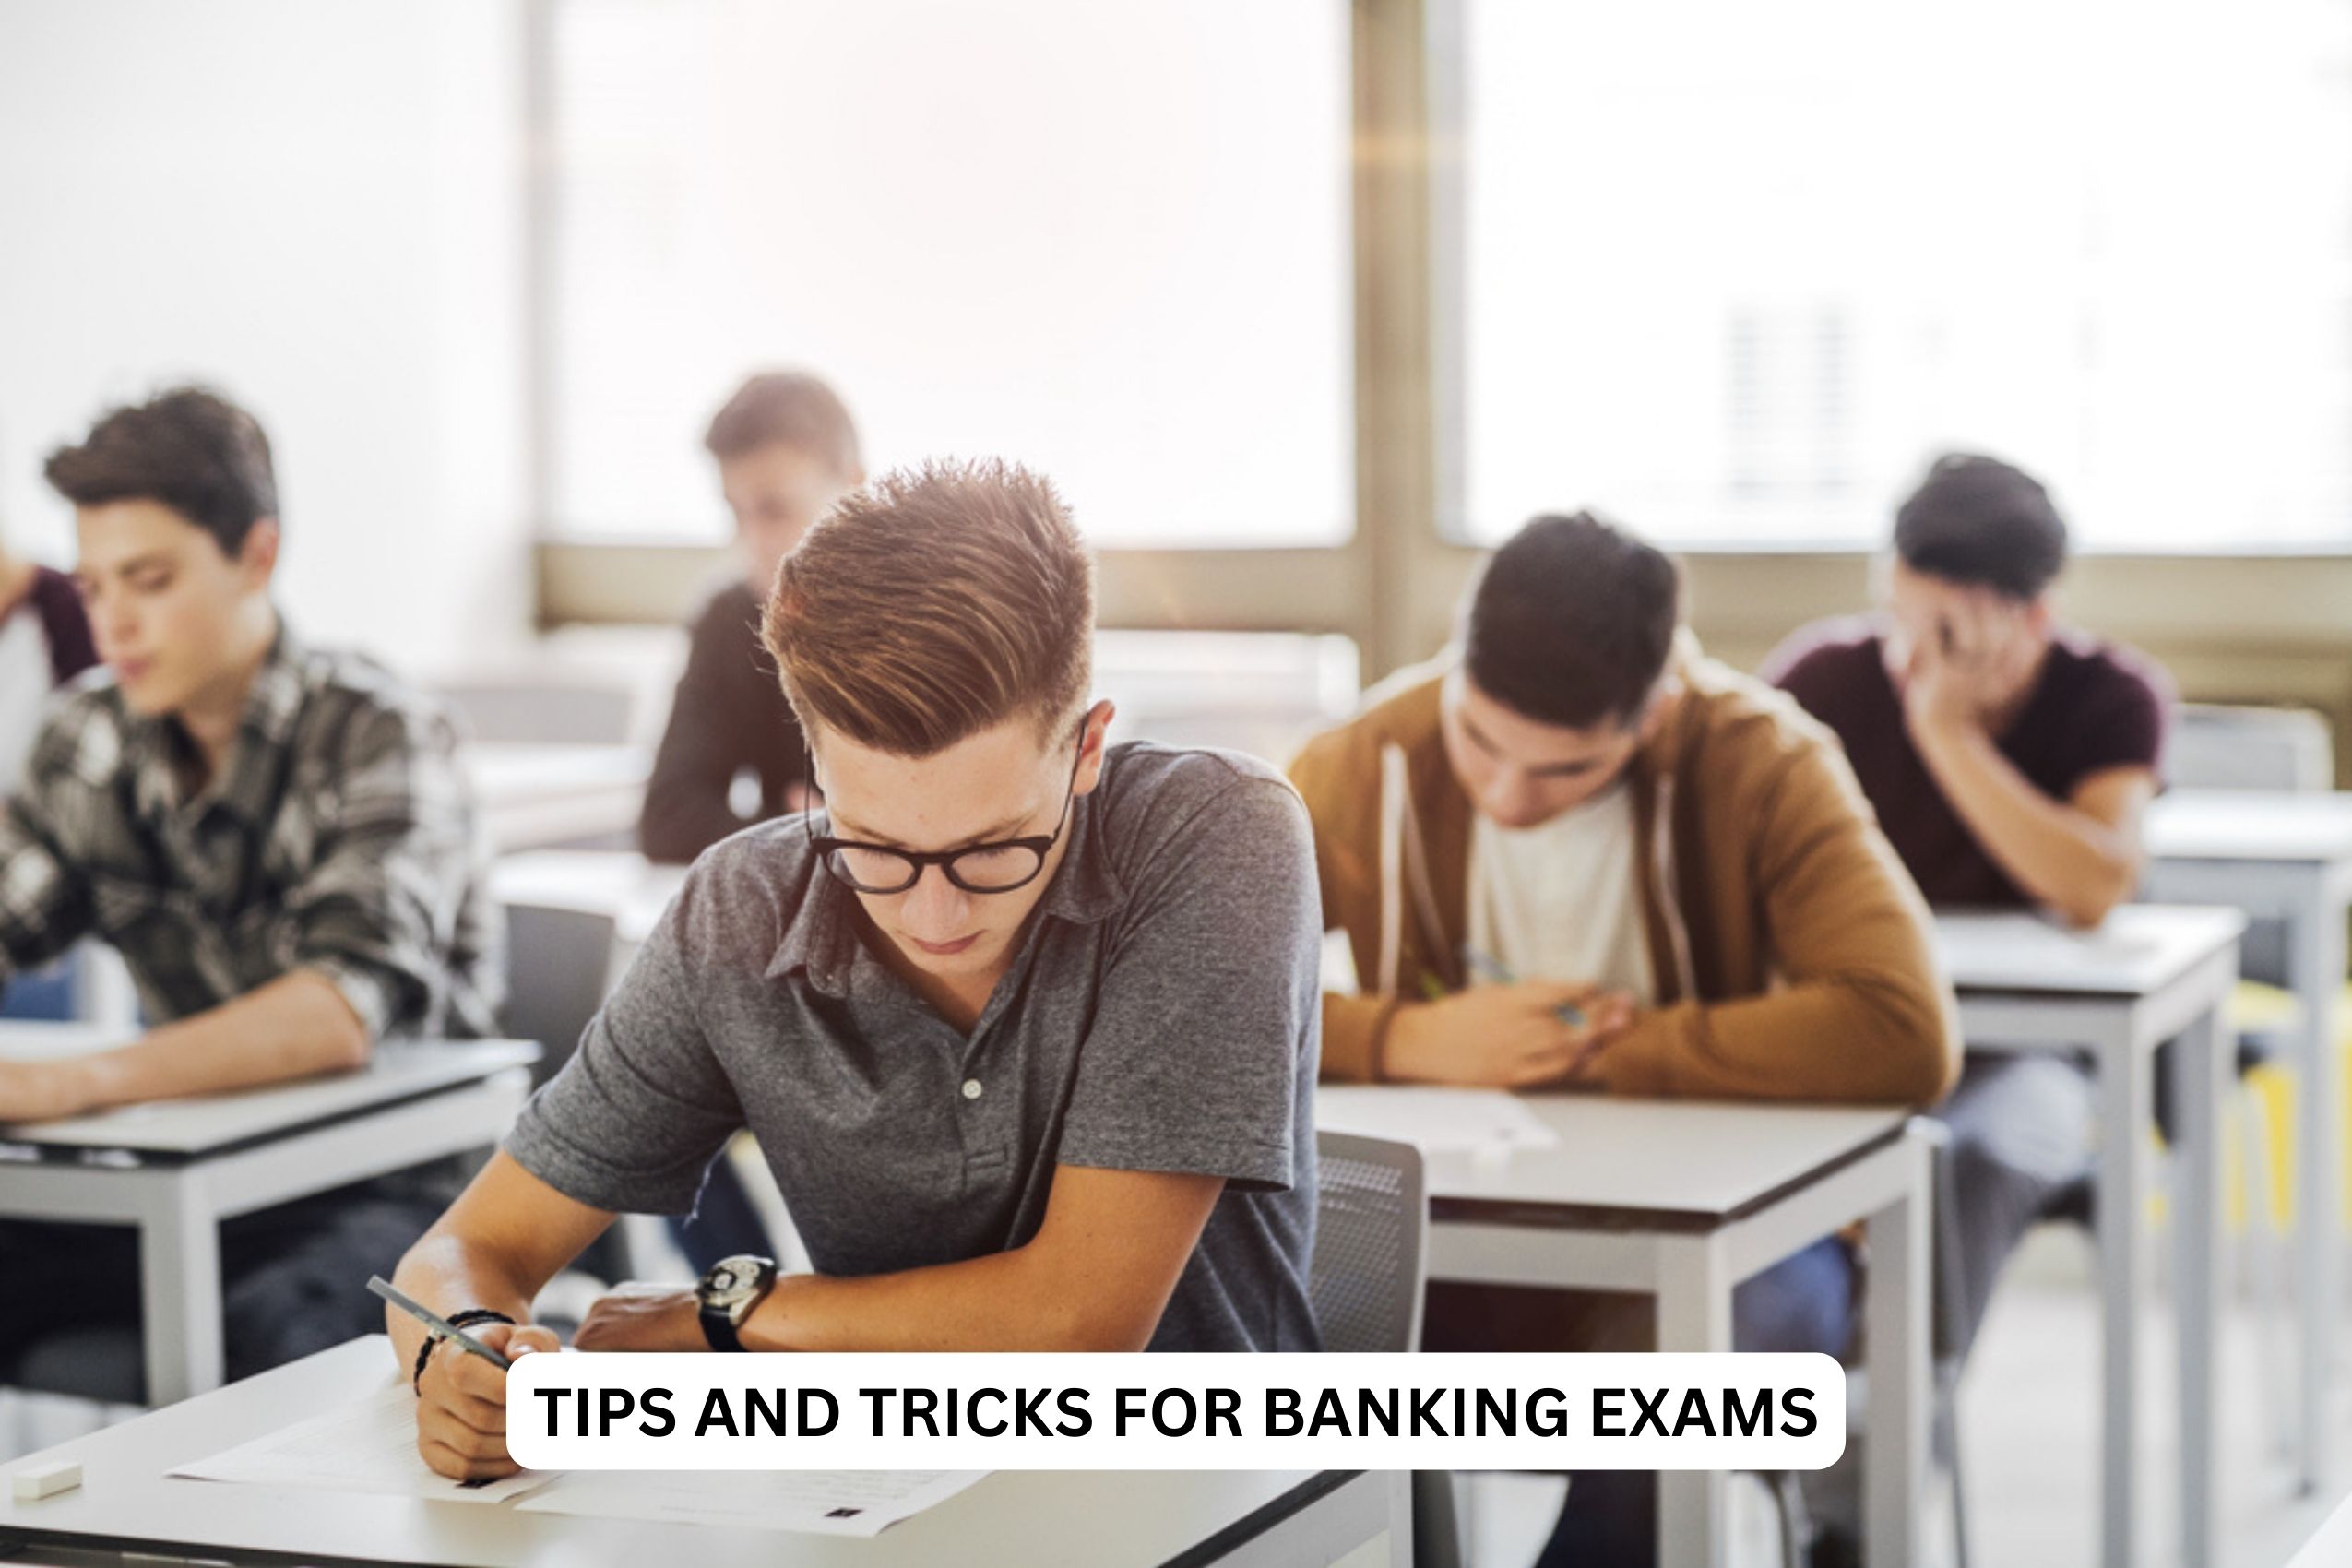 TIPS AND TRICKS FOR BANKING EXAMS